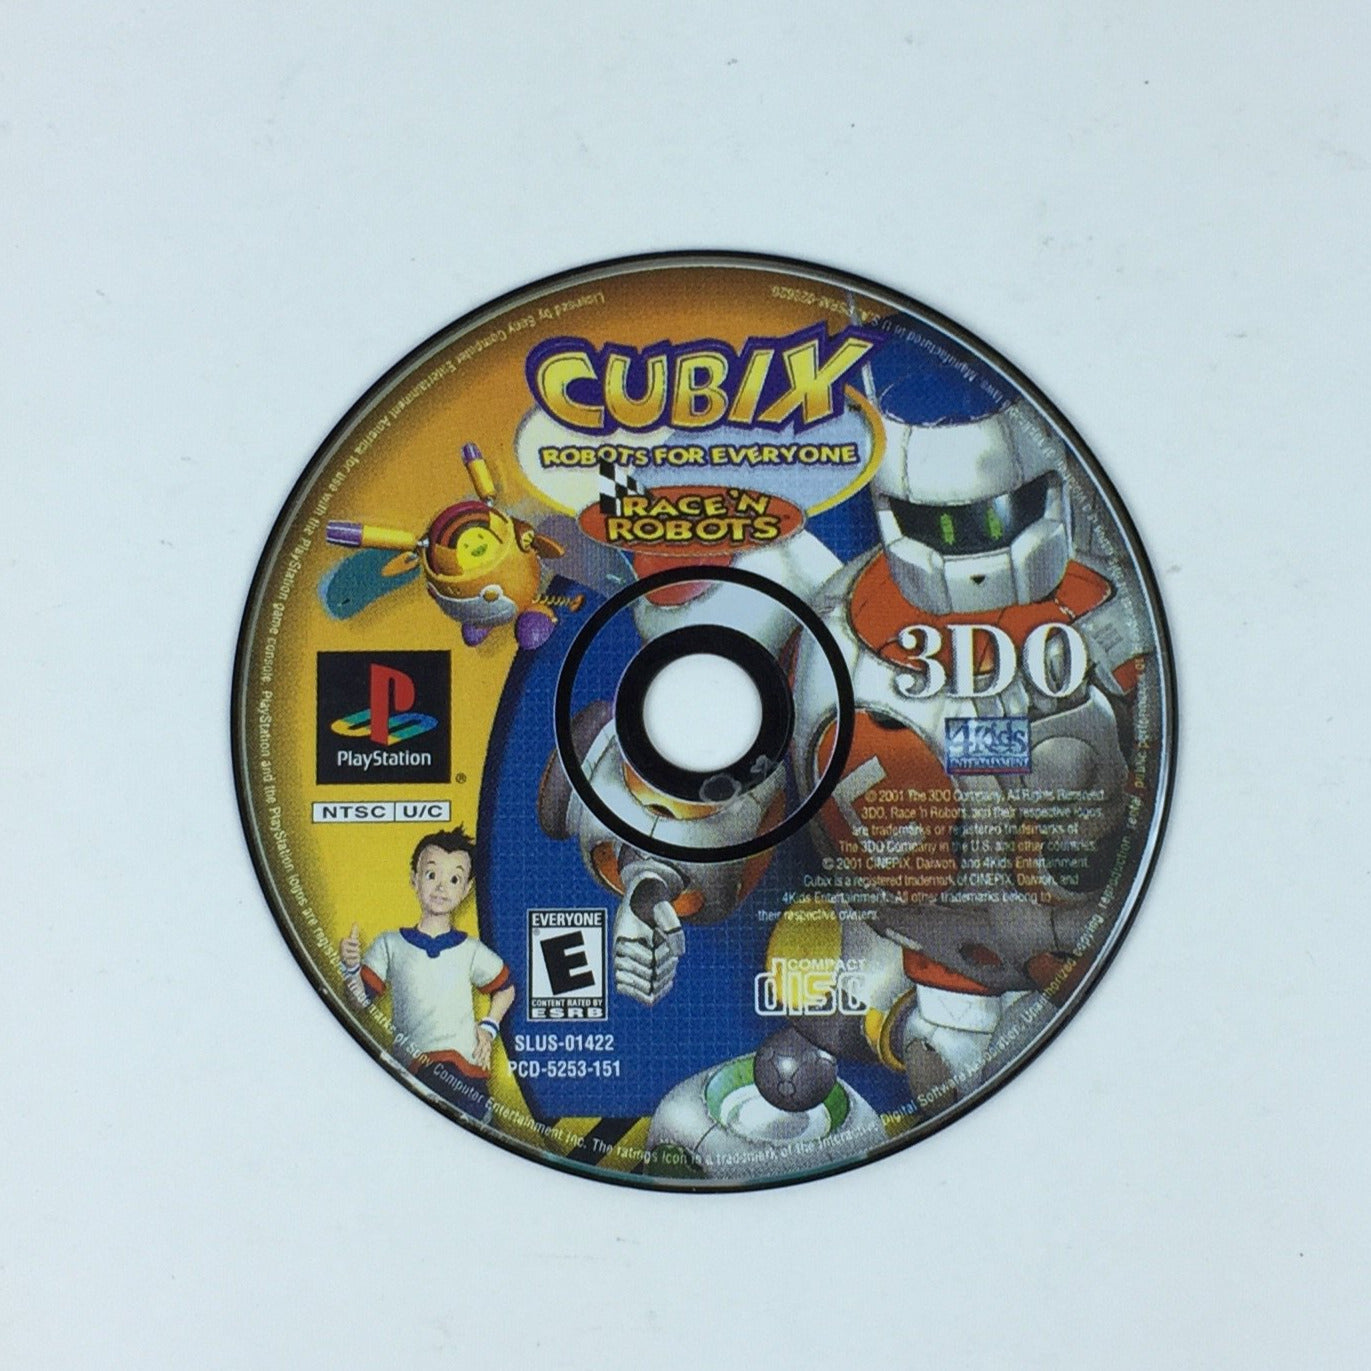 PlayStation 1 - Cubix Race N Robots Game - PS1 - DISC ONLY